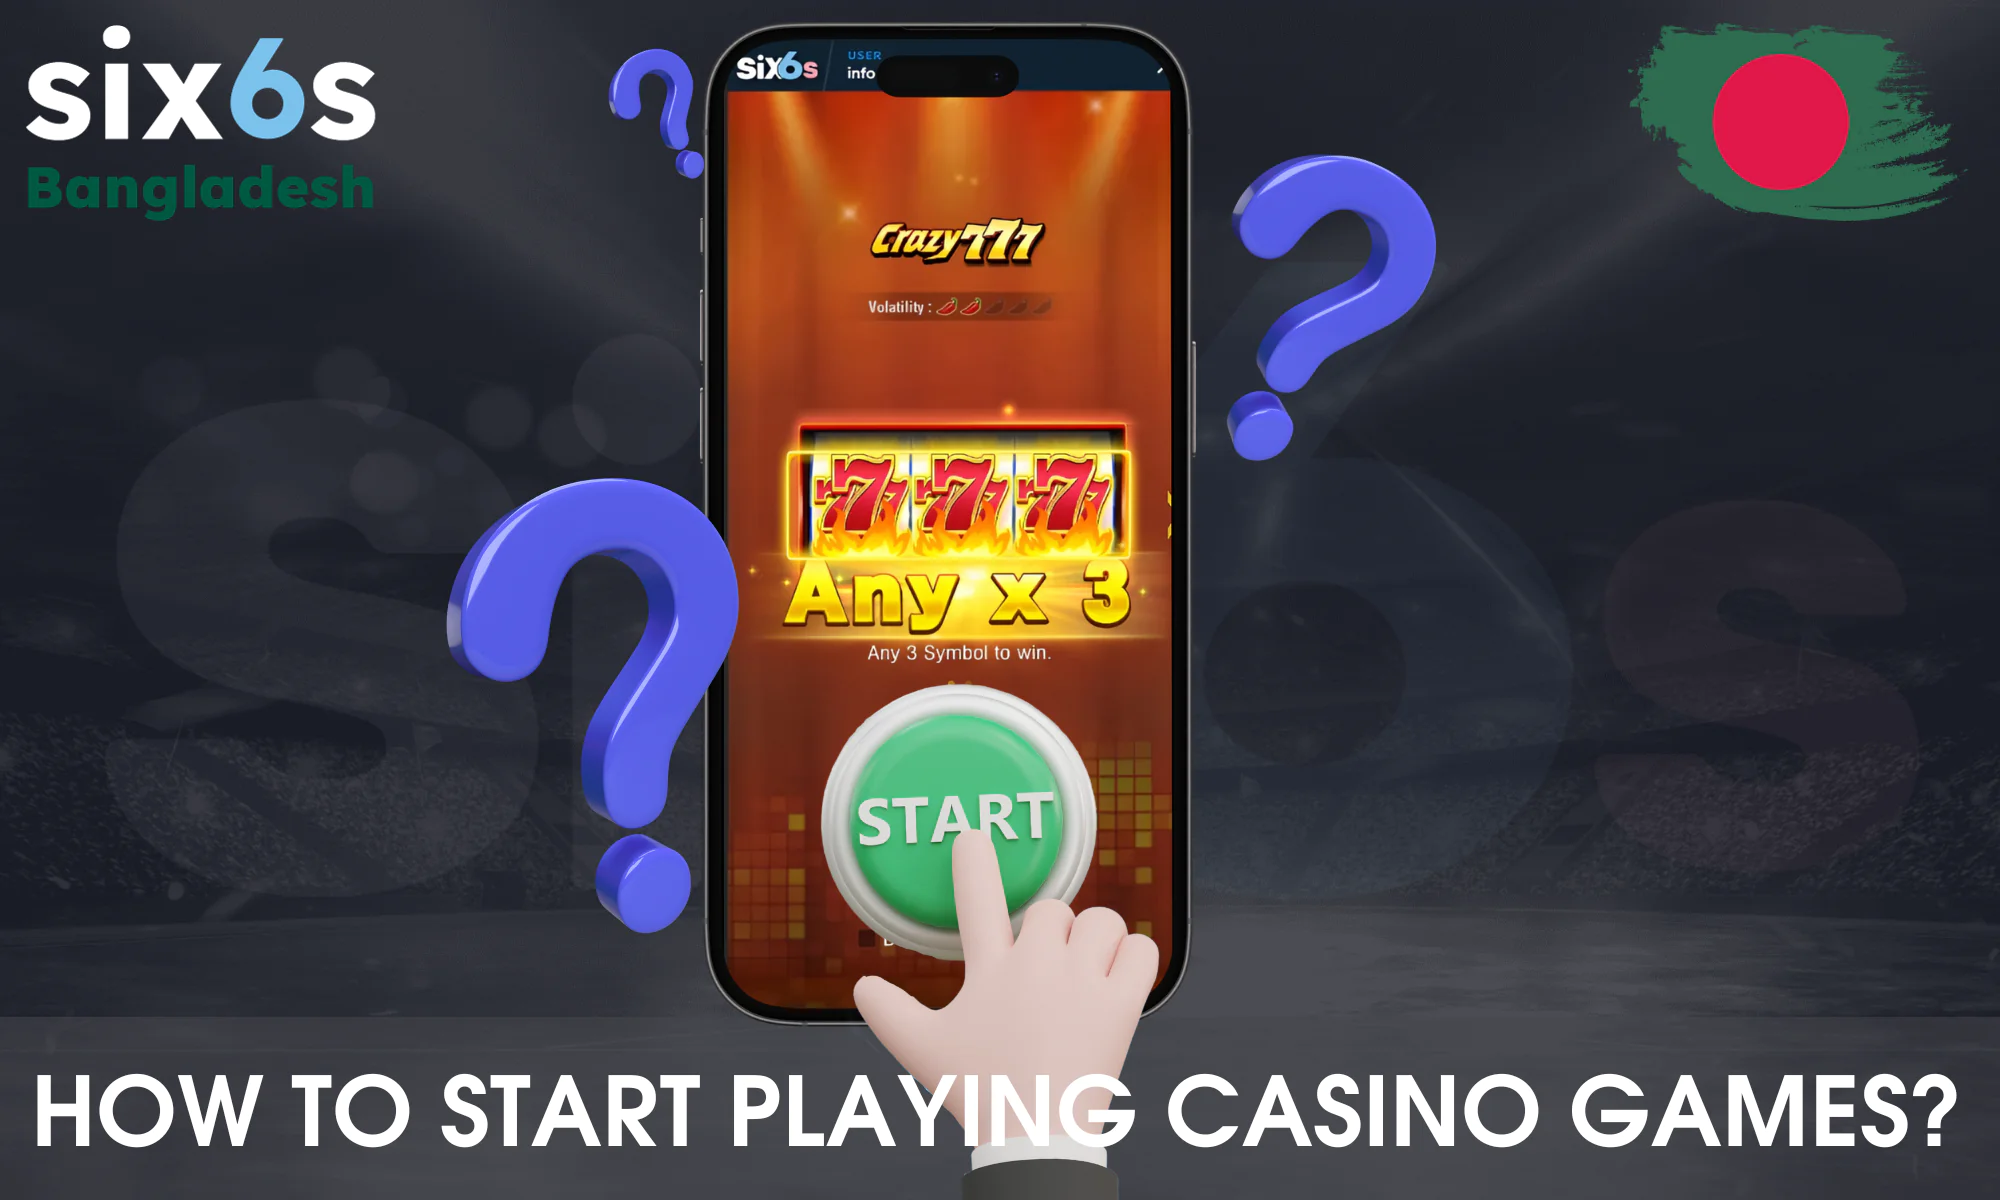 A few simple steps to start playing at Six6s Casino